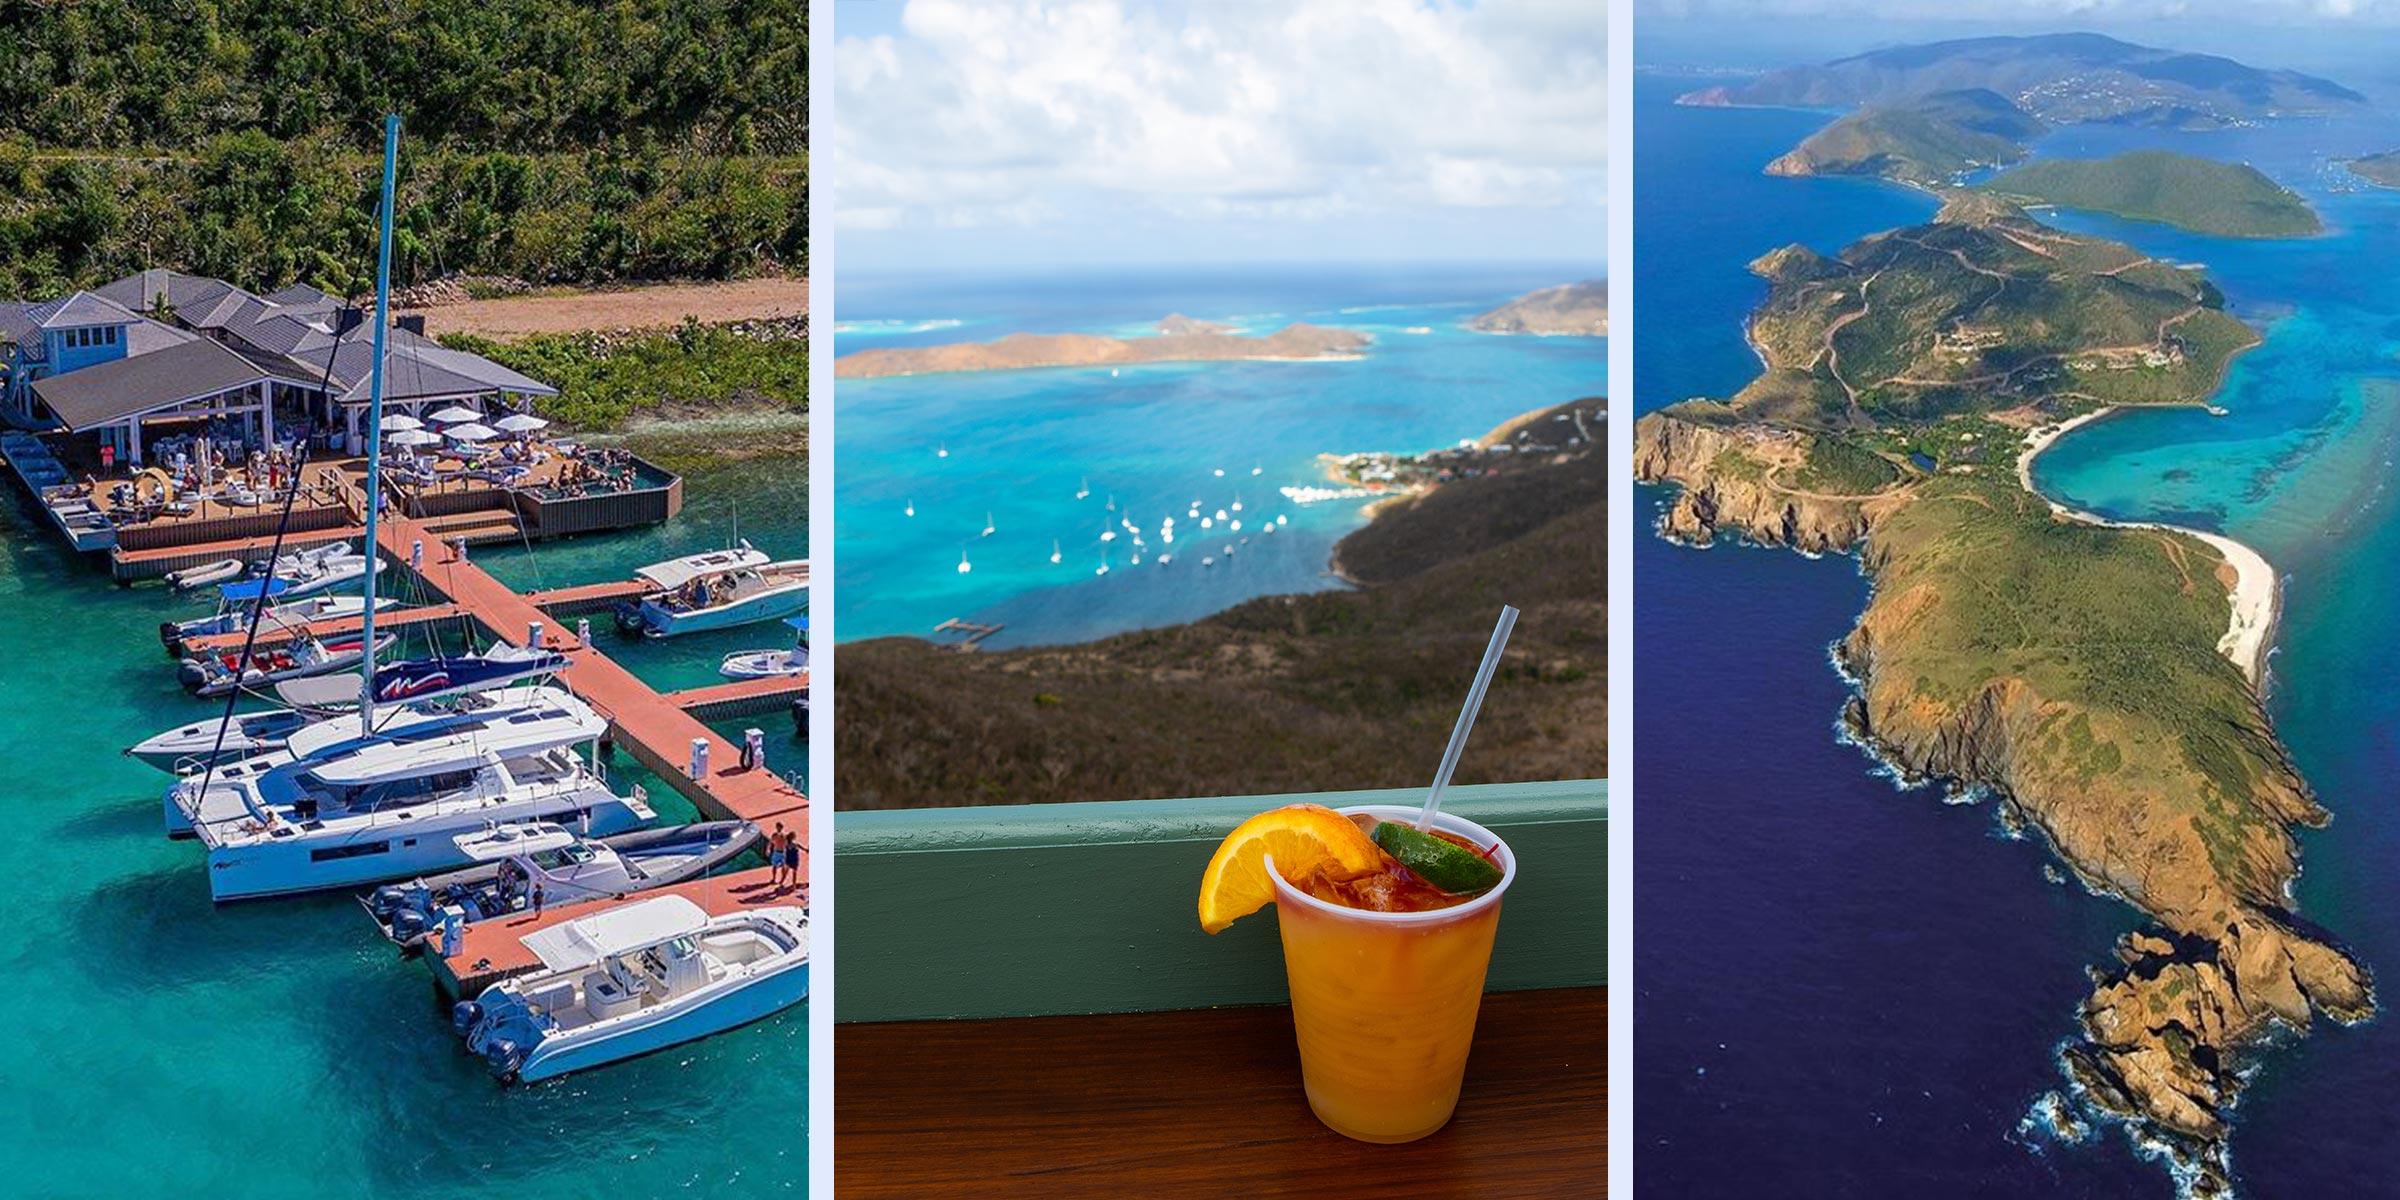 Oil Nut Bay and view from Hog Heaven on Virgin Gorda BVI